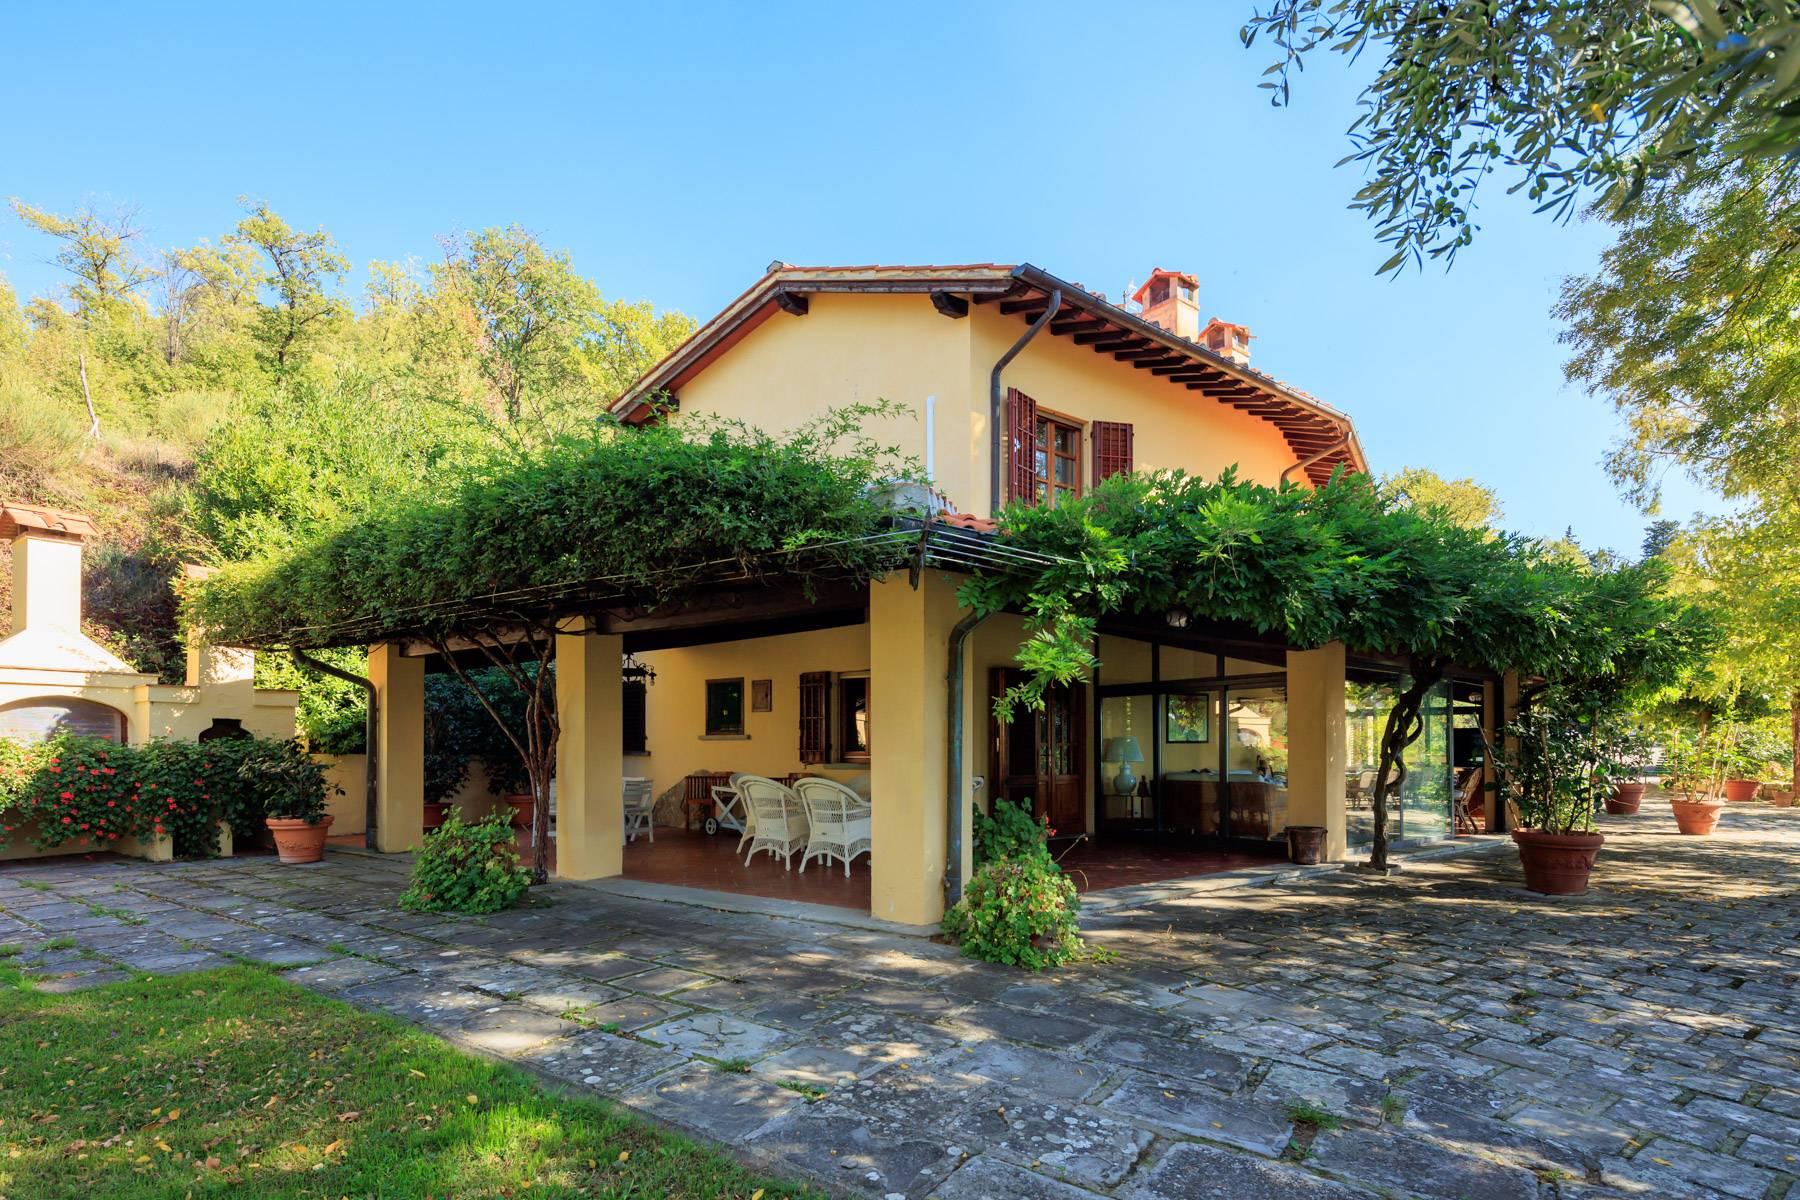 Charming Tuscan farmhouse with 70 acres of land - 28